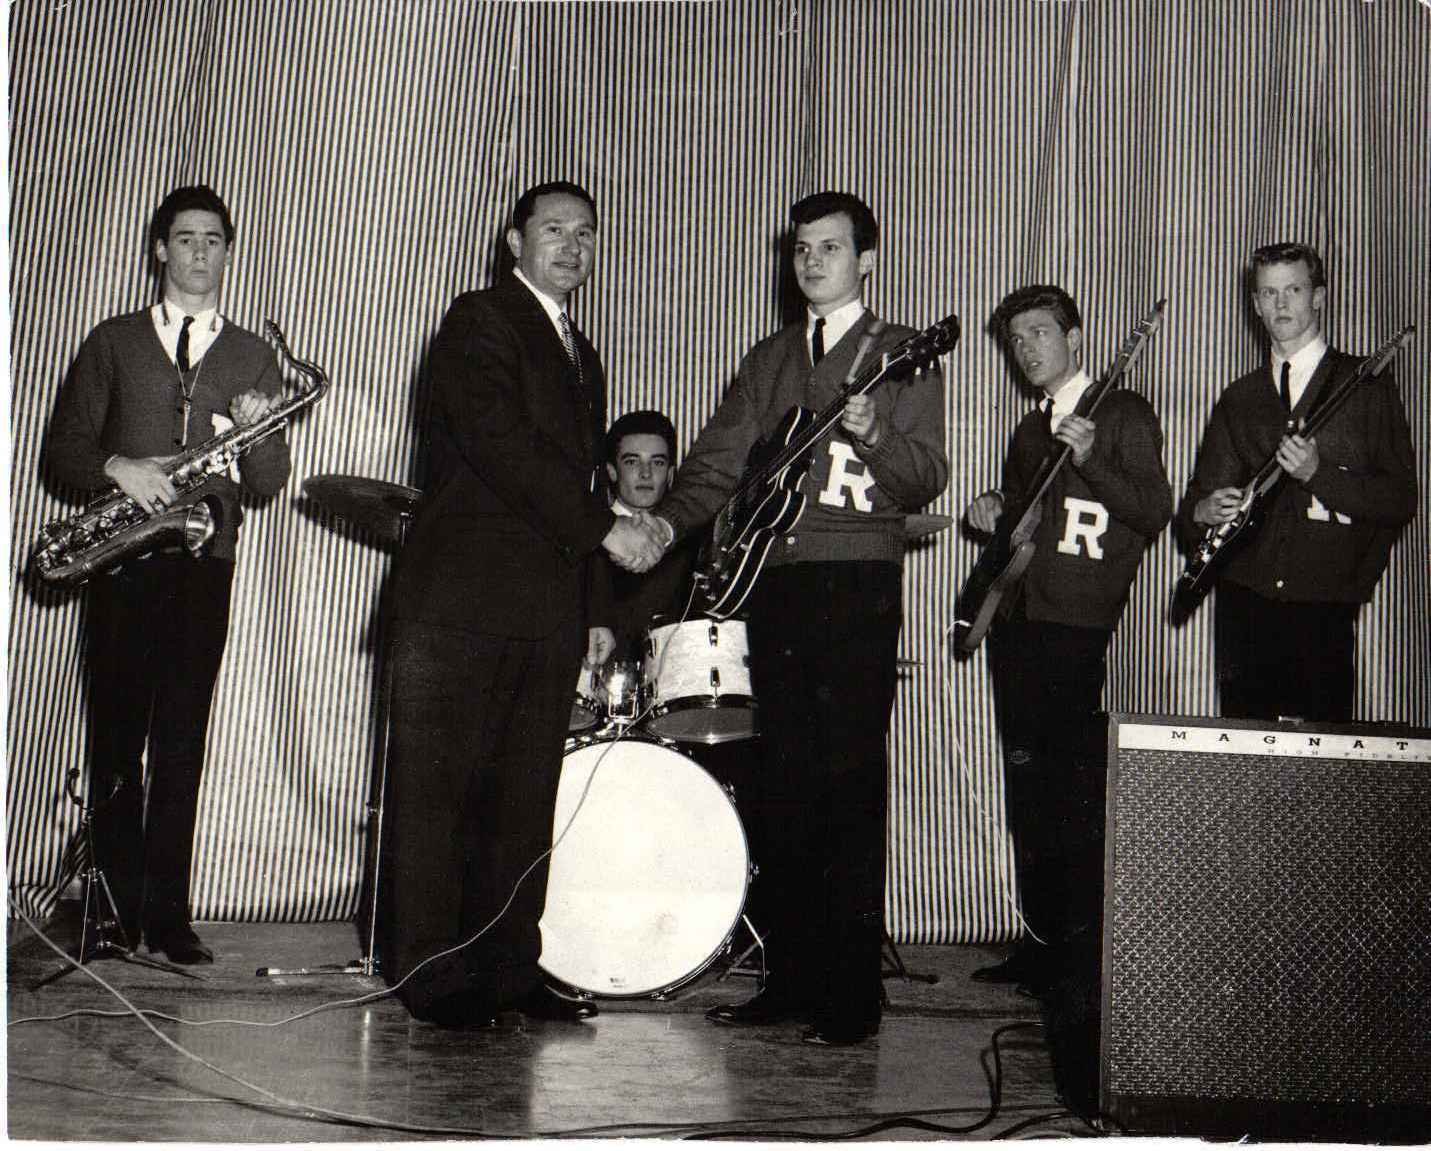 The Routers on tour in 1962. Michael Gordon,guitar, Randy Viers, drums, Scott Engel, bass.